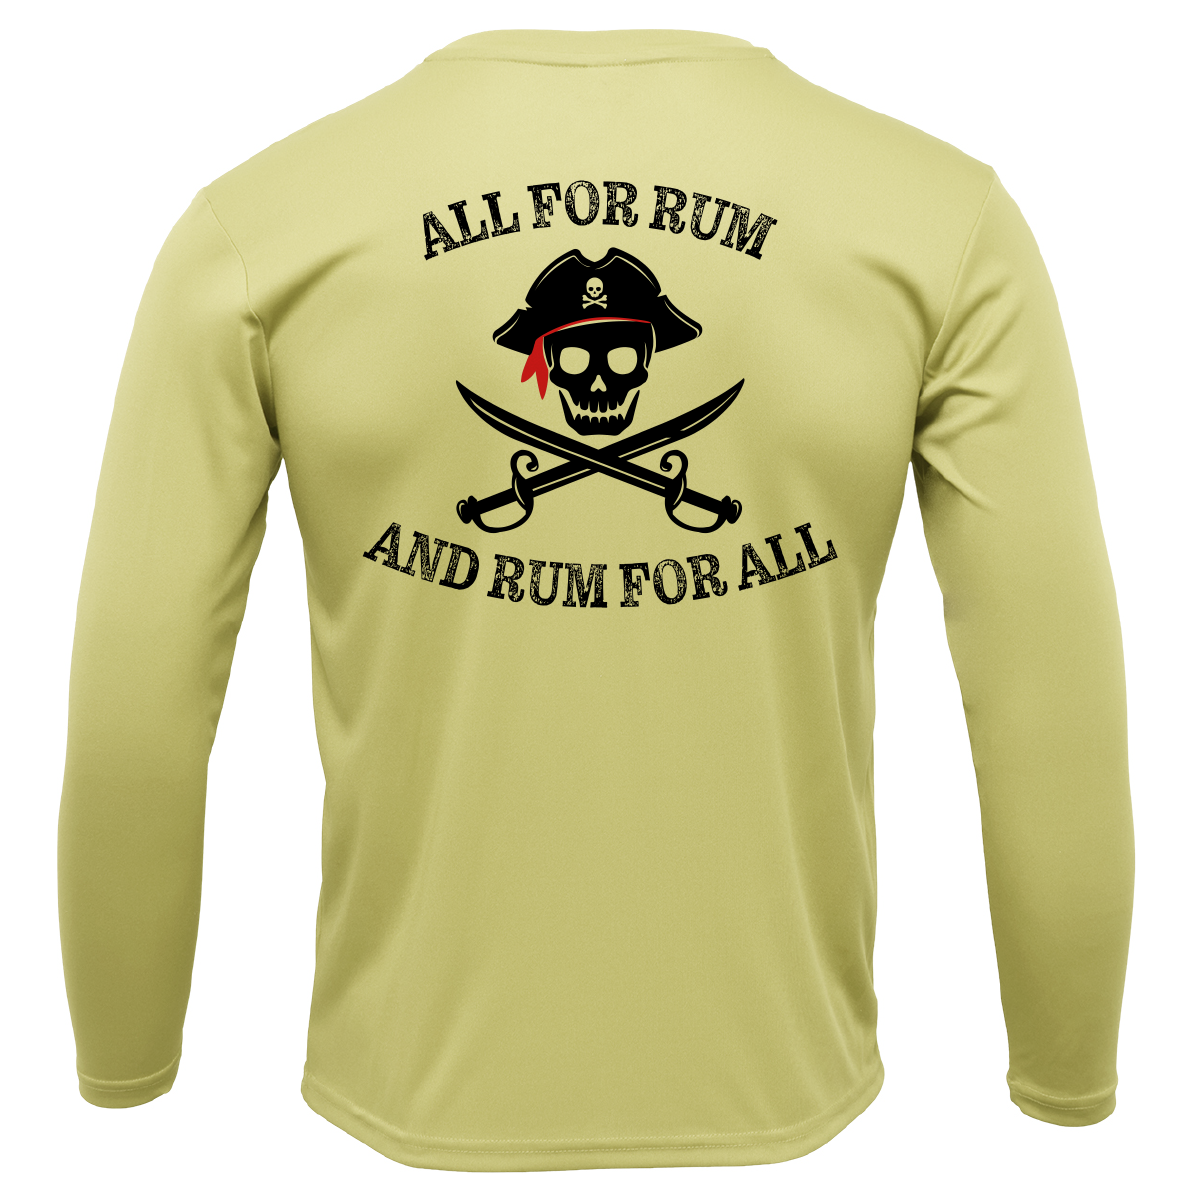 Florida Freshwater Born "All For Rum and Rum For All" Camisa de manga larga UPF 50+ Dry-Fit